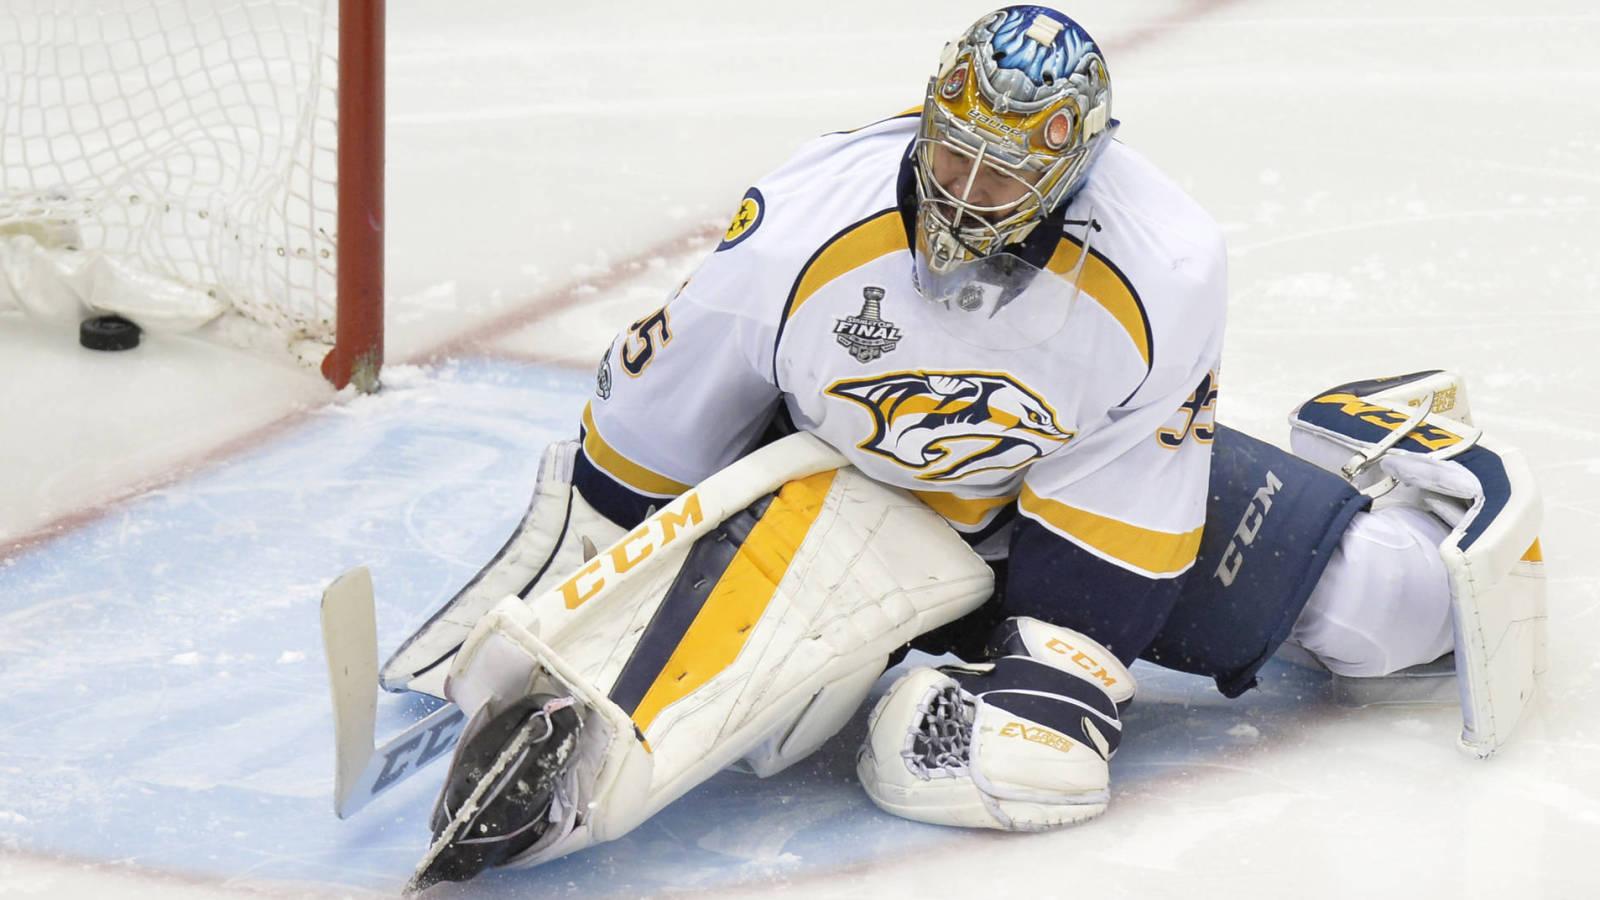 Only Pekka Rinne can save Predators from early Finals exit